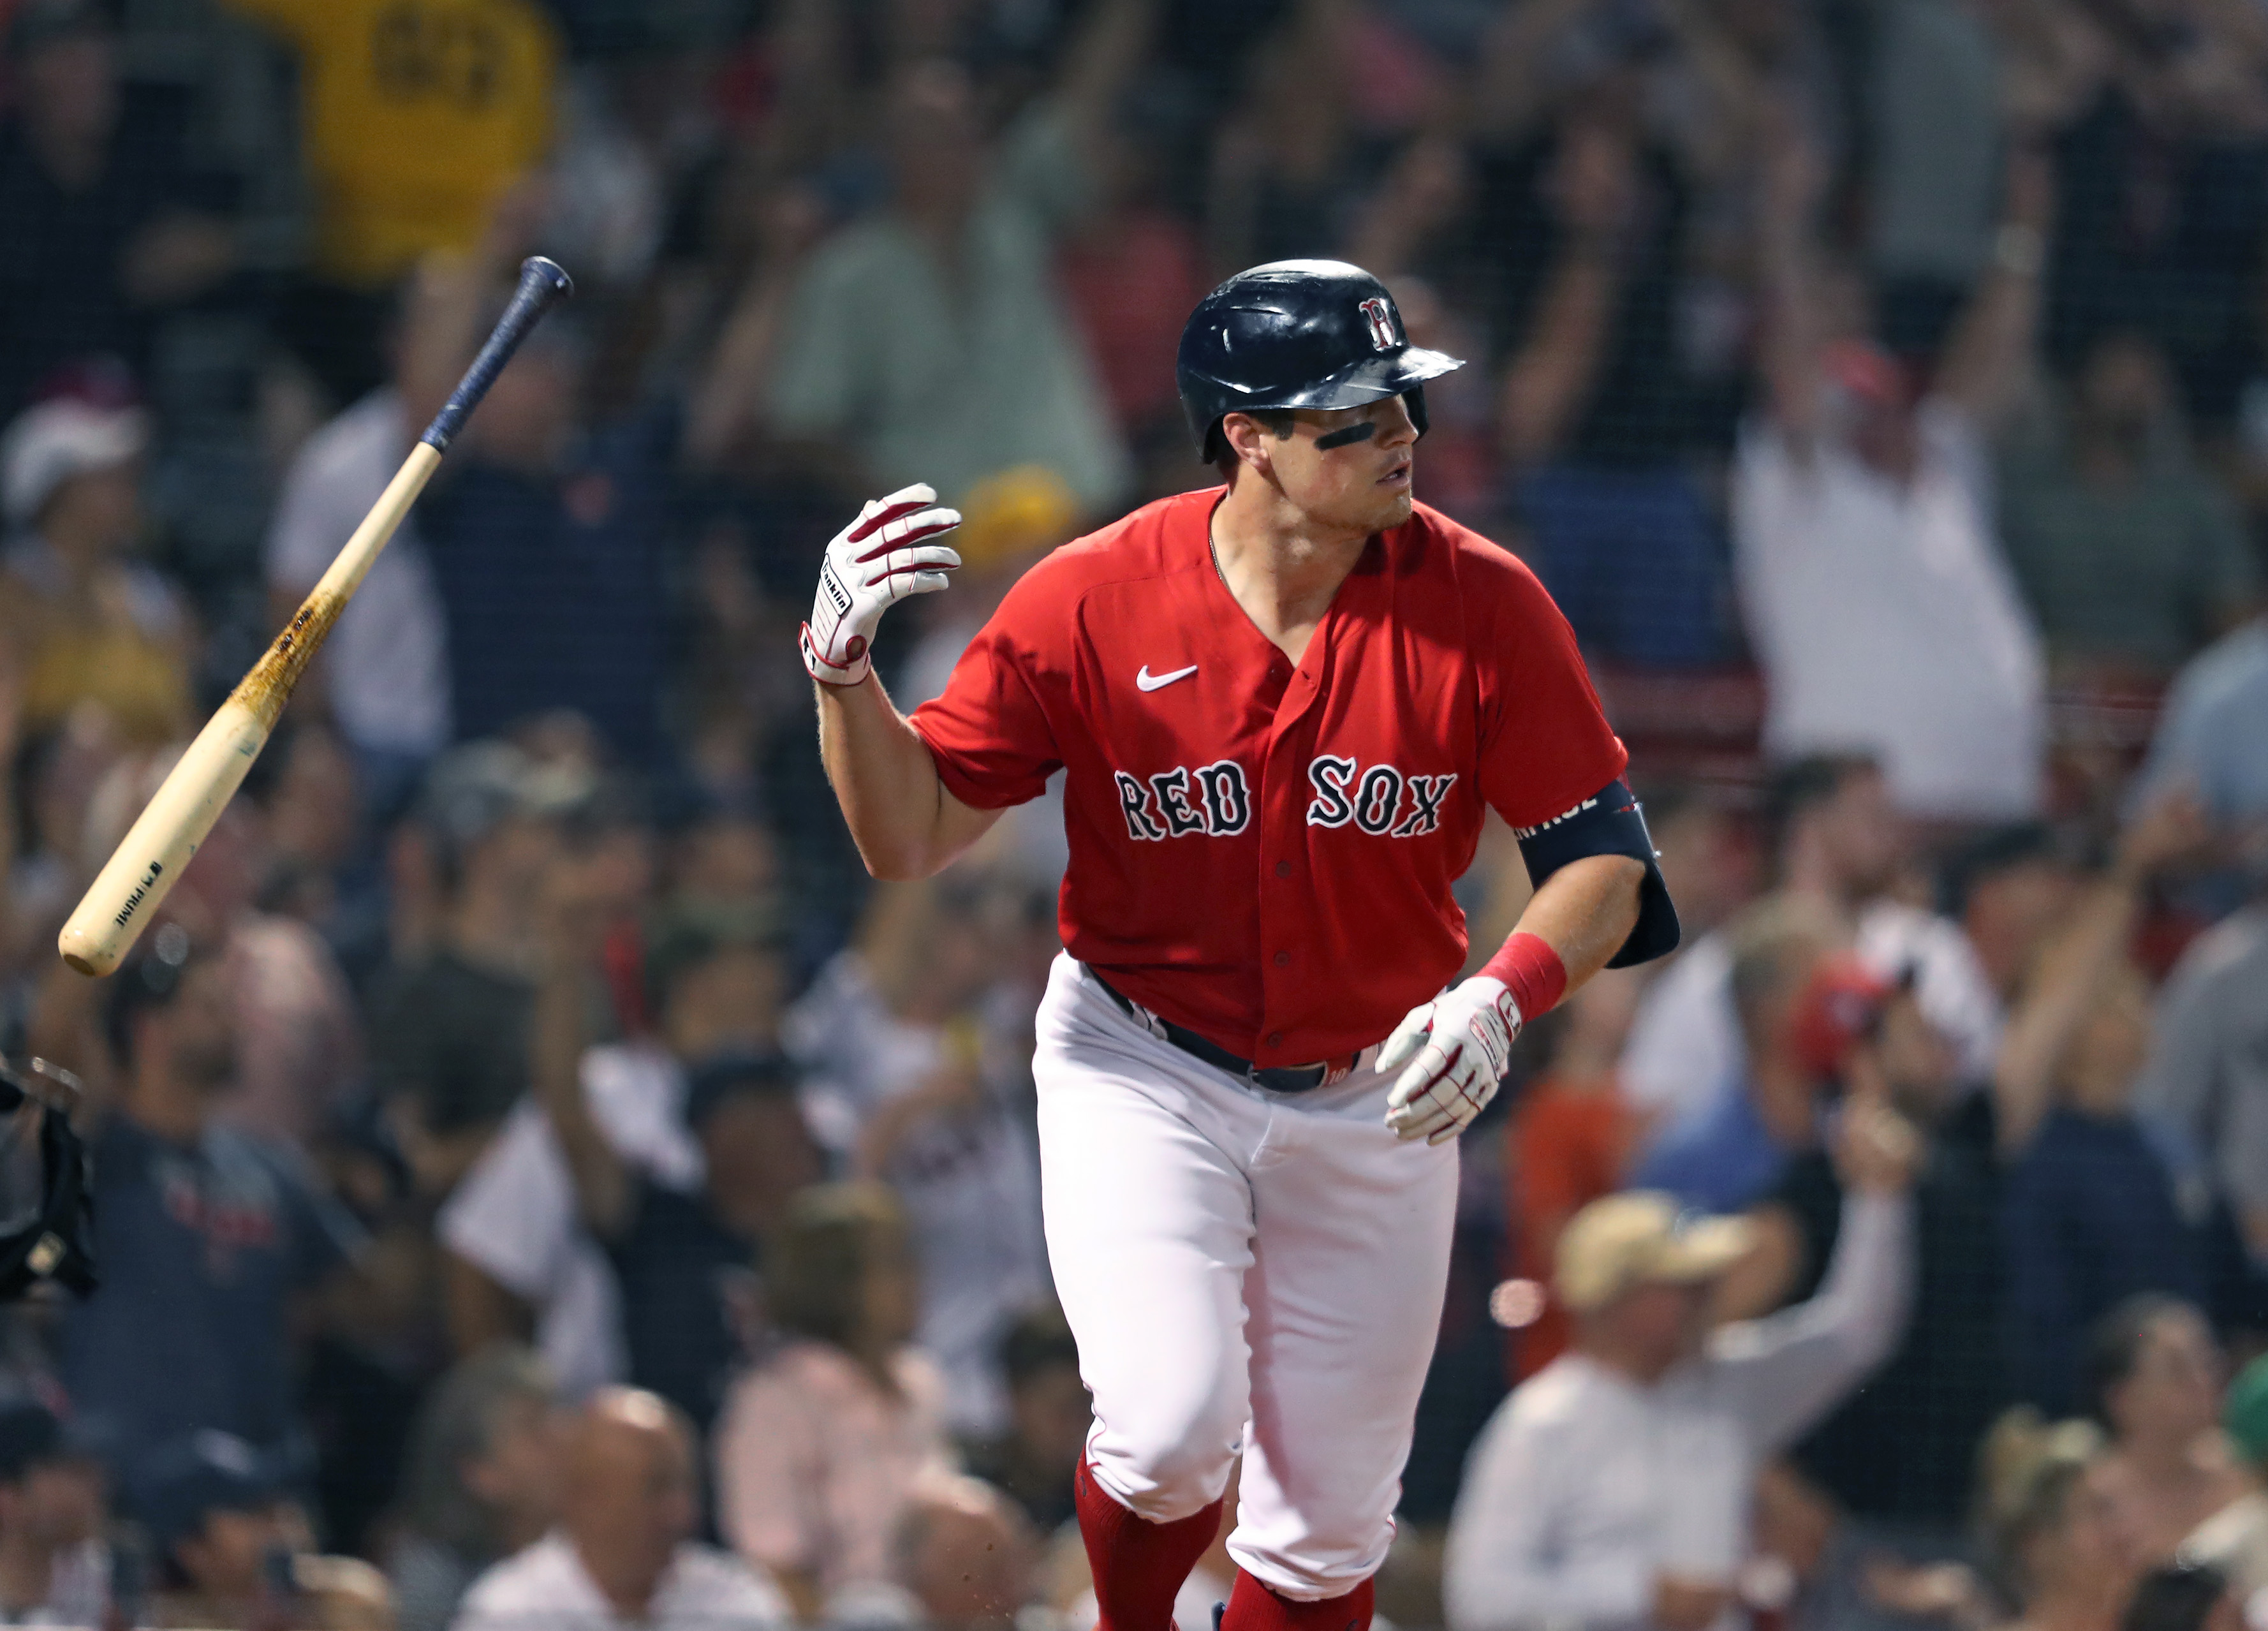 Joining the Red Sox gave Hunter Renfroe a chance to play every day